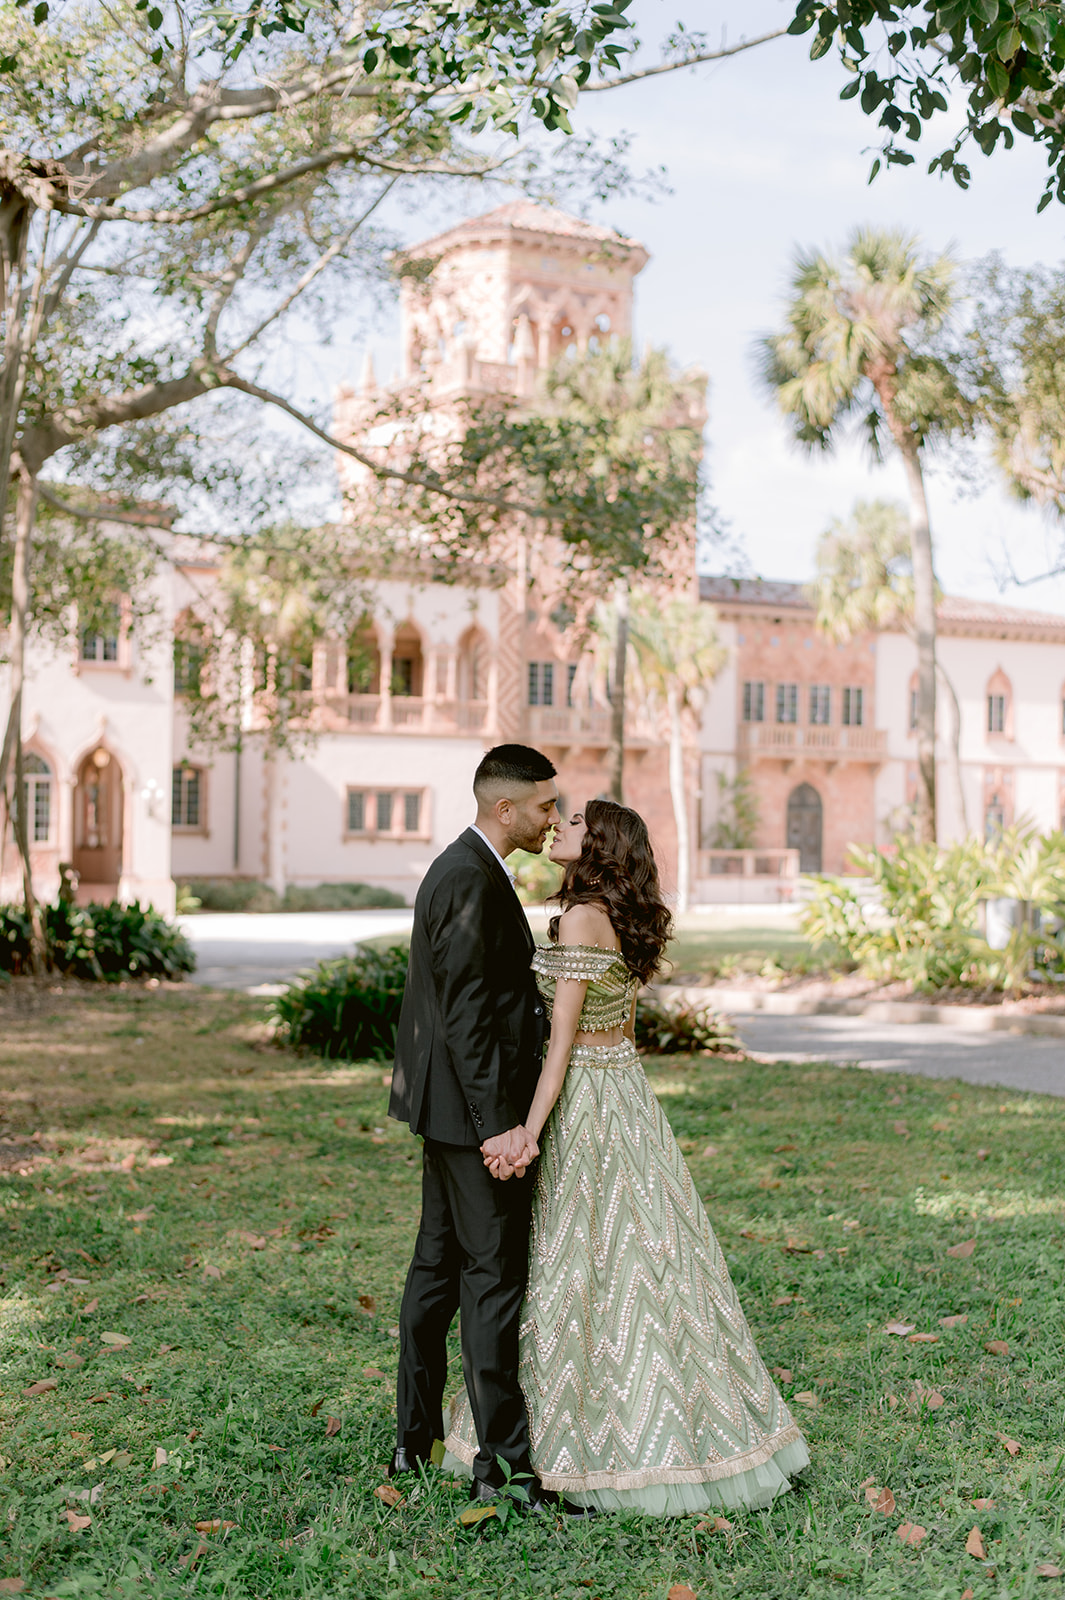 "Indian couple showcases their love at the Ringling Museum's Ca' d'Zan mansion"
